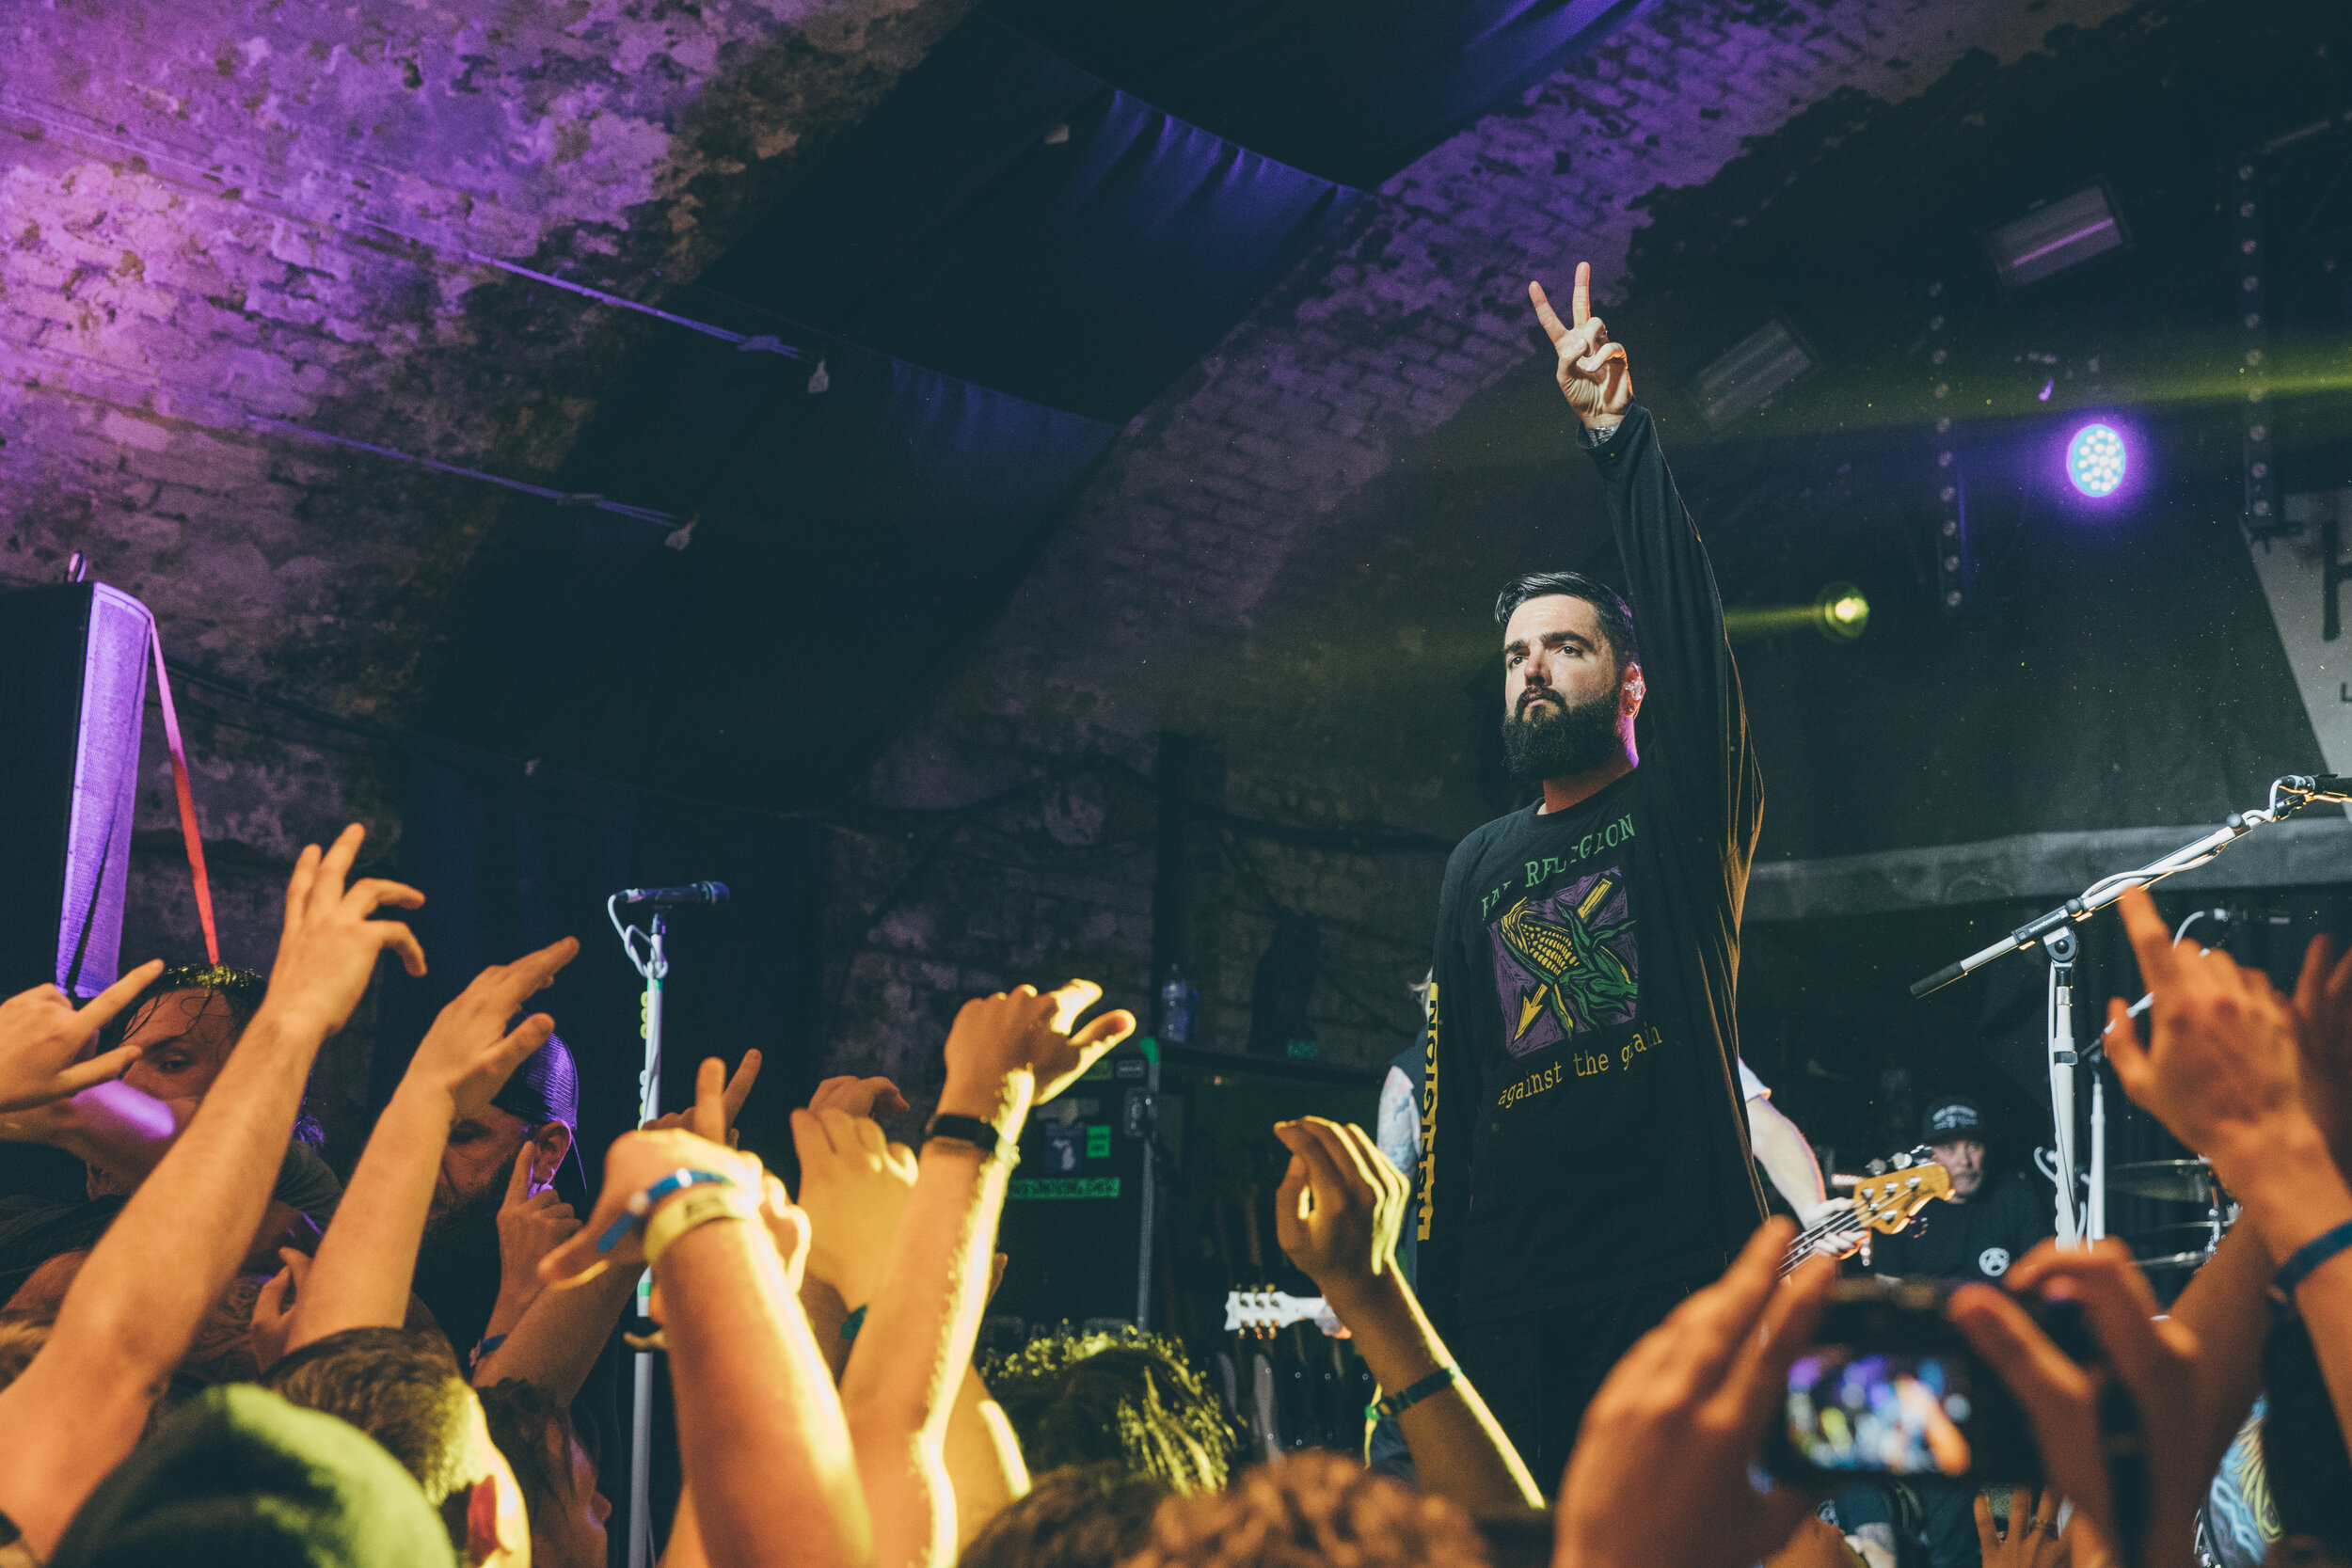 A DAY TO REMEMBER//LIVE AT HOUSE OF VANS 2019